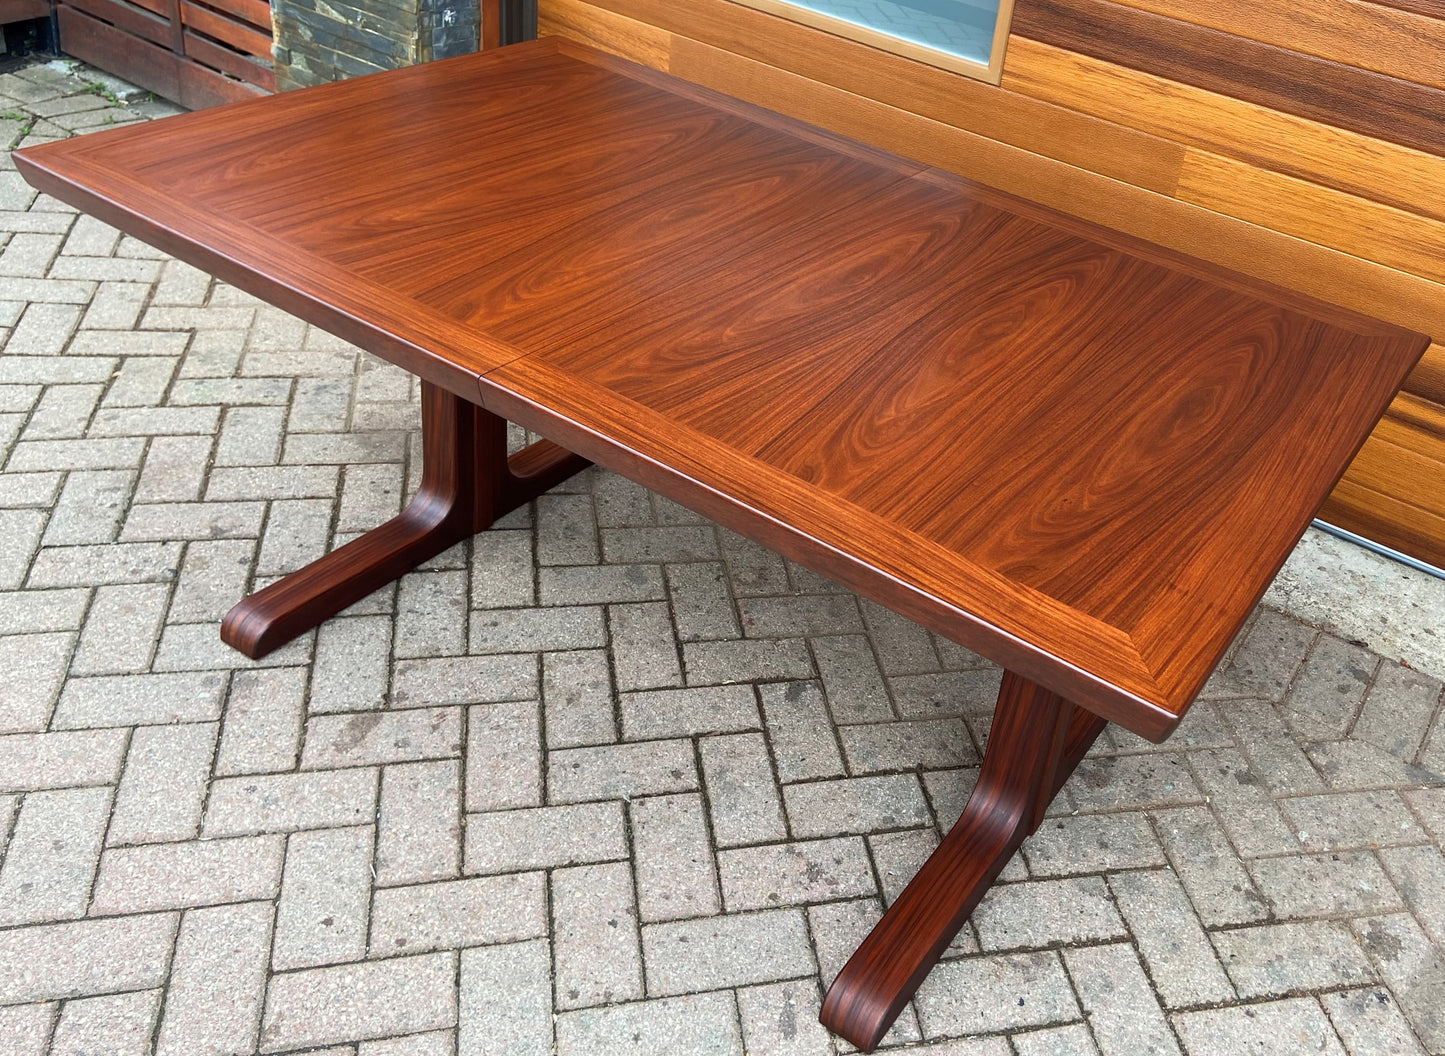 REFINISHED Mid Century Modern Rosewood Table w 2 Leaves, 64.5"-104", PERFECT